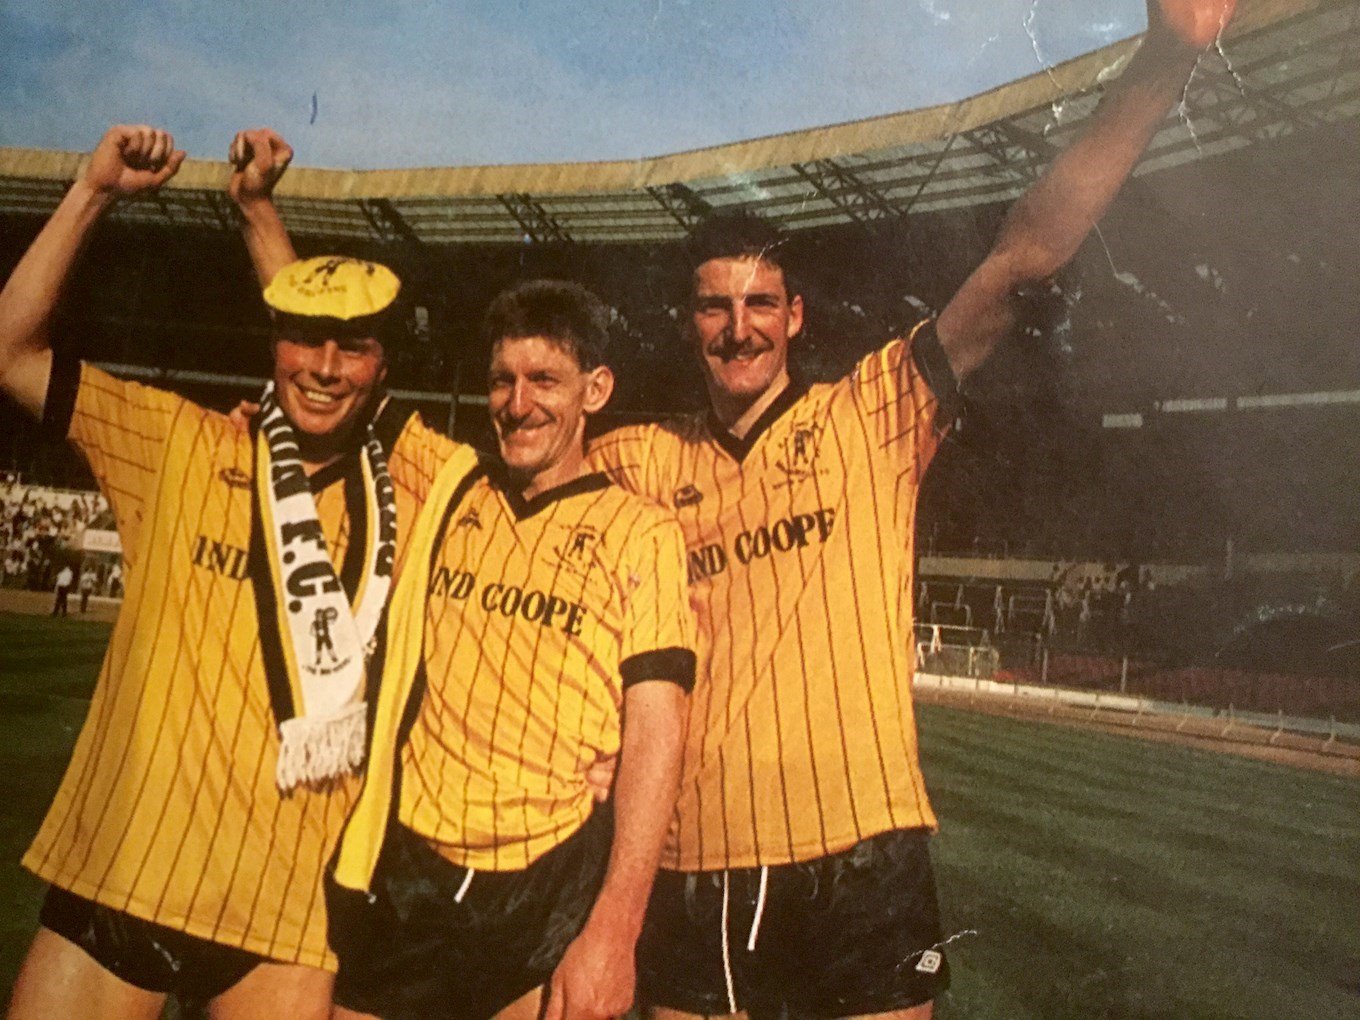 Burton Albion made it to the FA Trophy final in 1987.